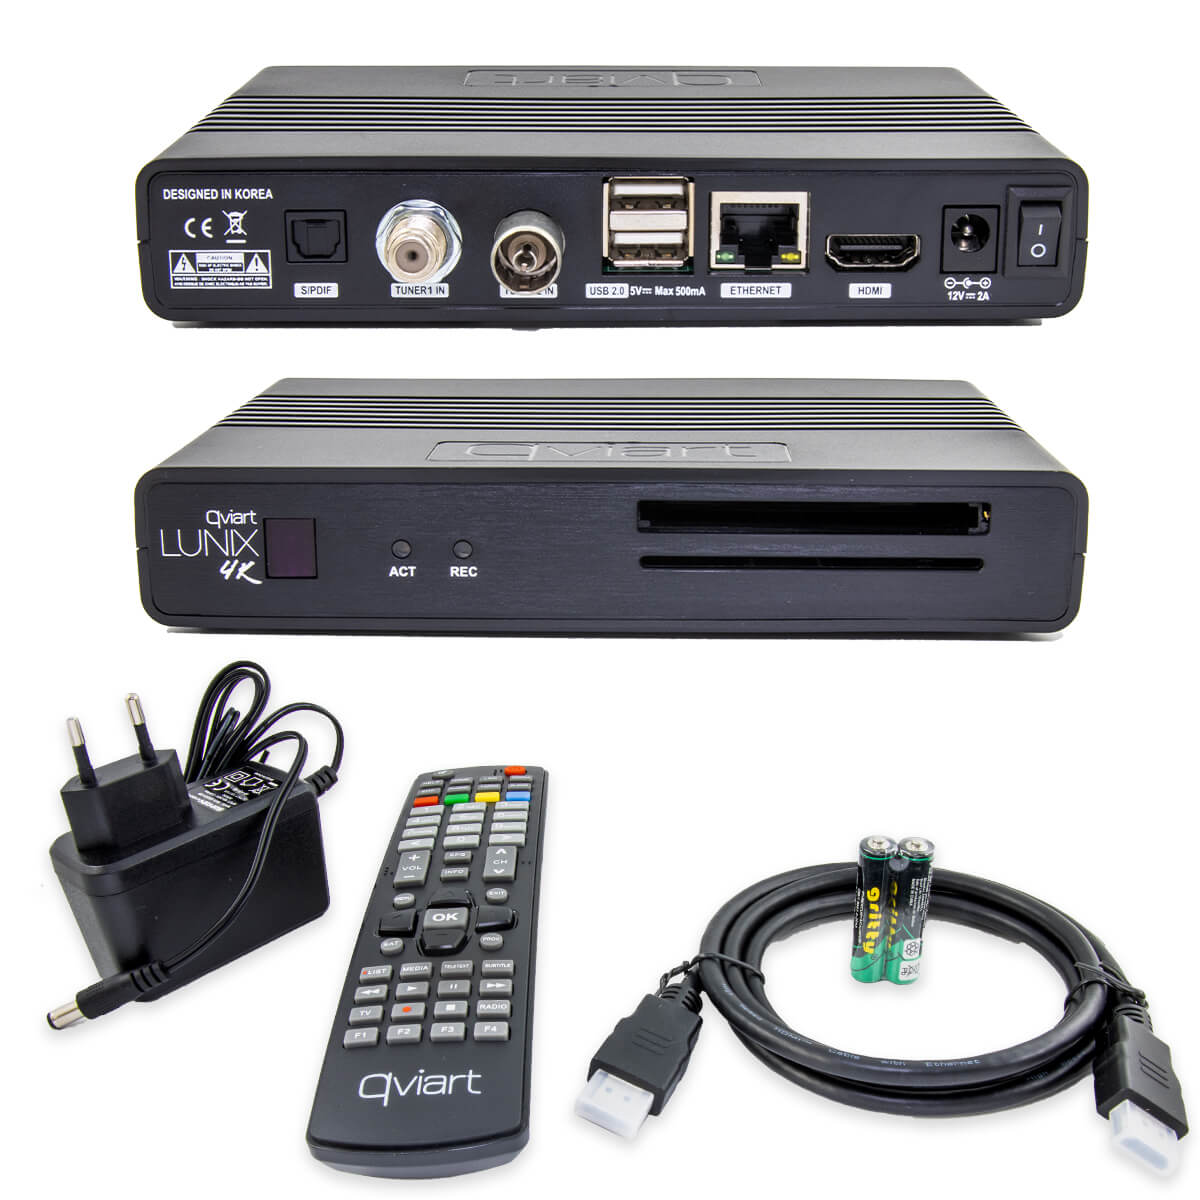 Qviart-linux-4k-Combo-UHD-Receiver